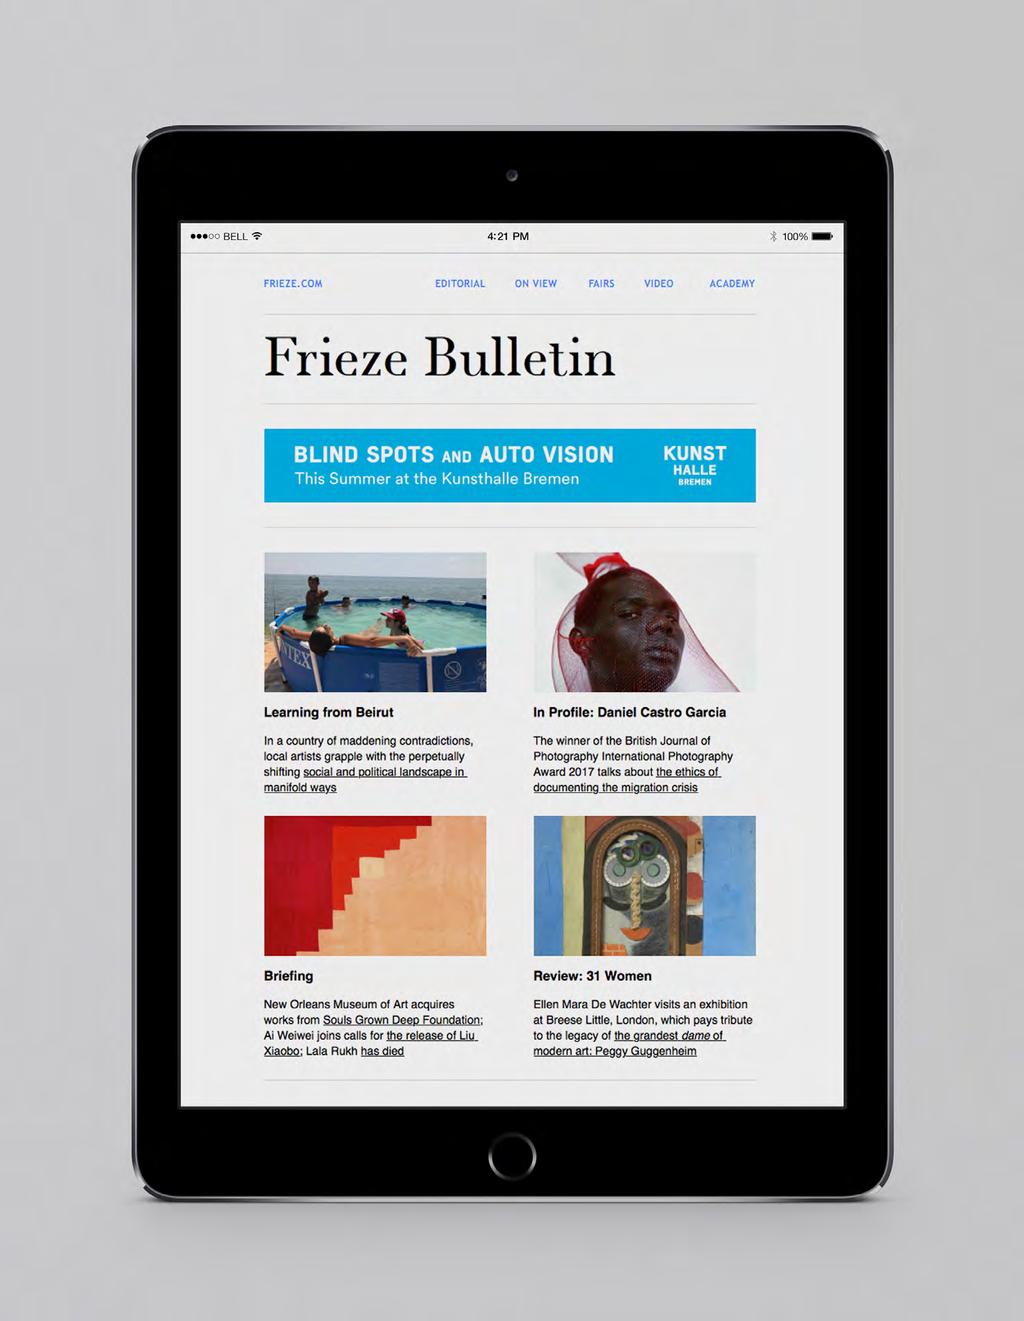 e-bulletin e-newsletter Reader Distribution 43% 57% Our twice-weekly Frieze Bulletin publishes a timely round-up of online editorial, videos, blog posts and reviews from the editors.